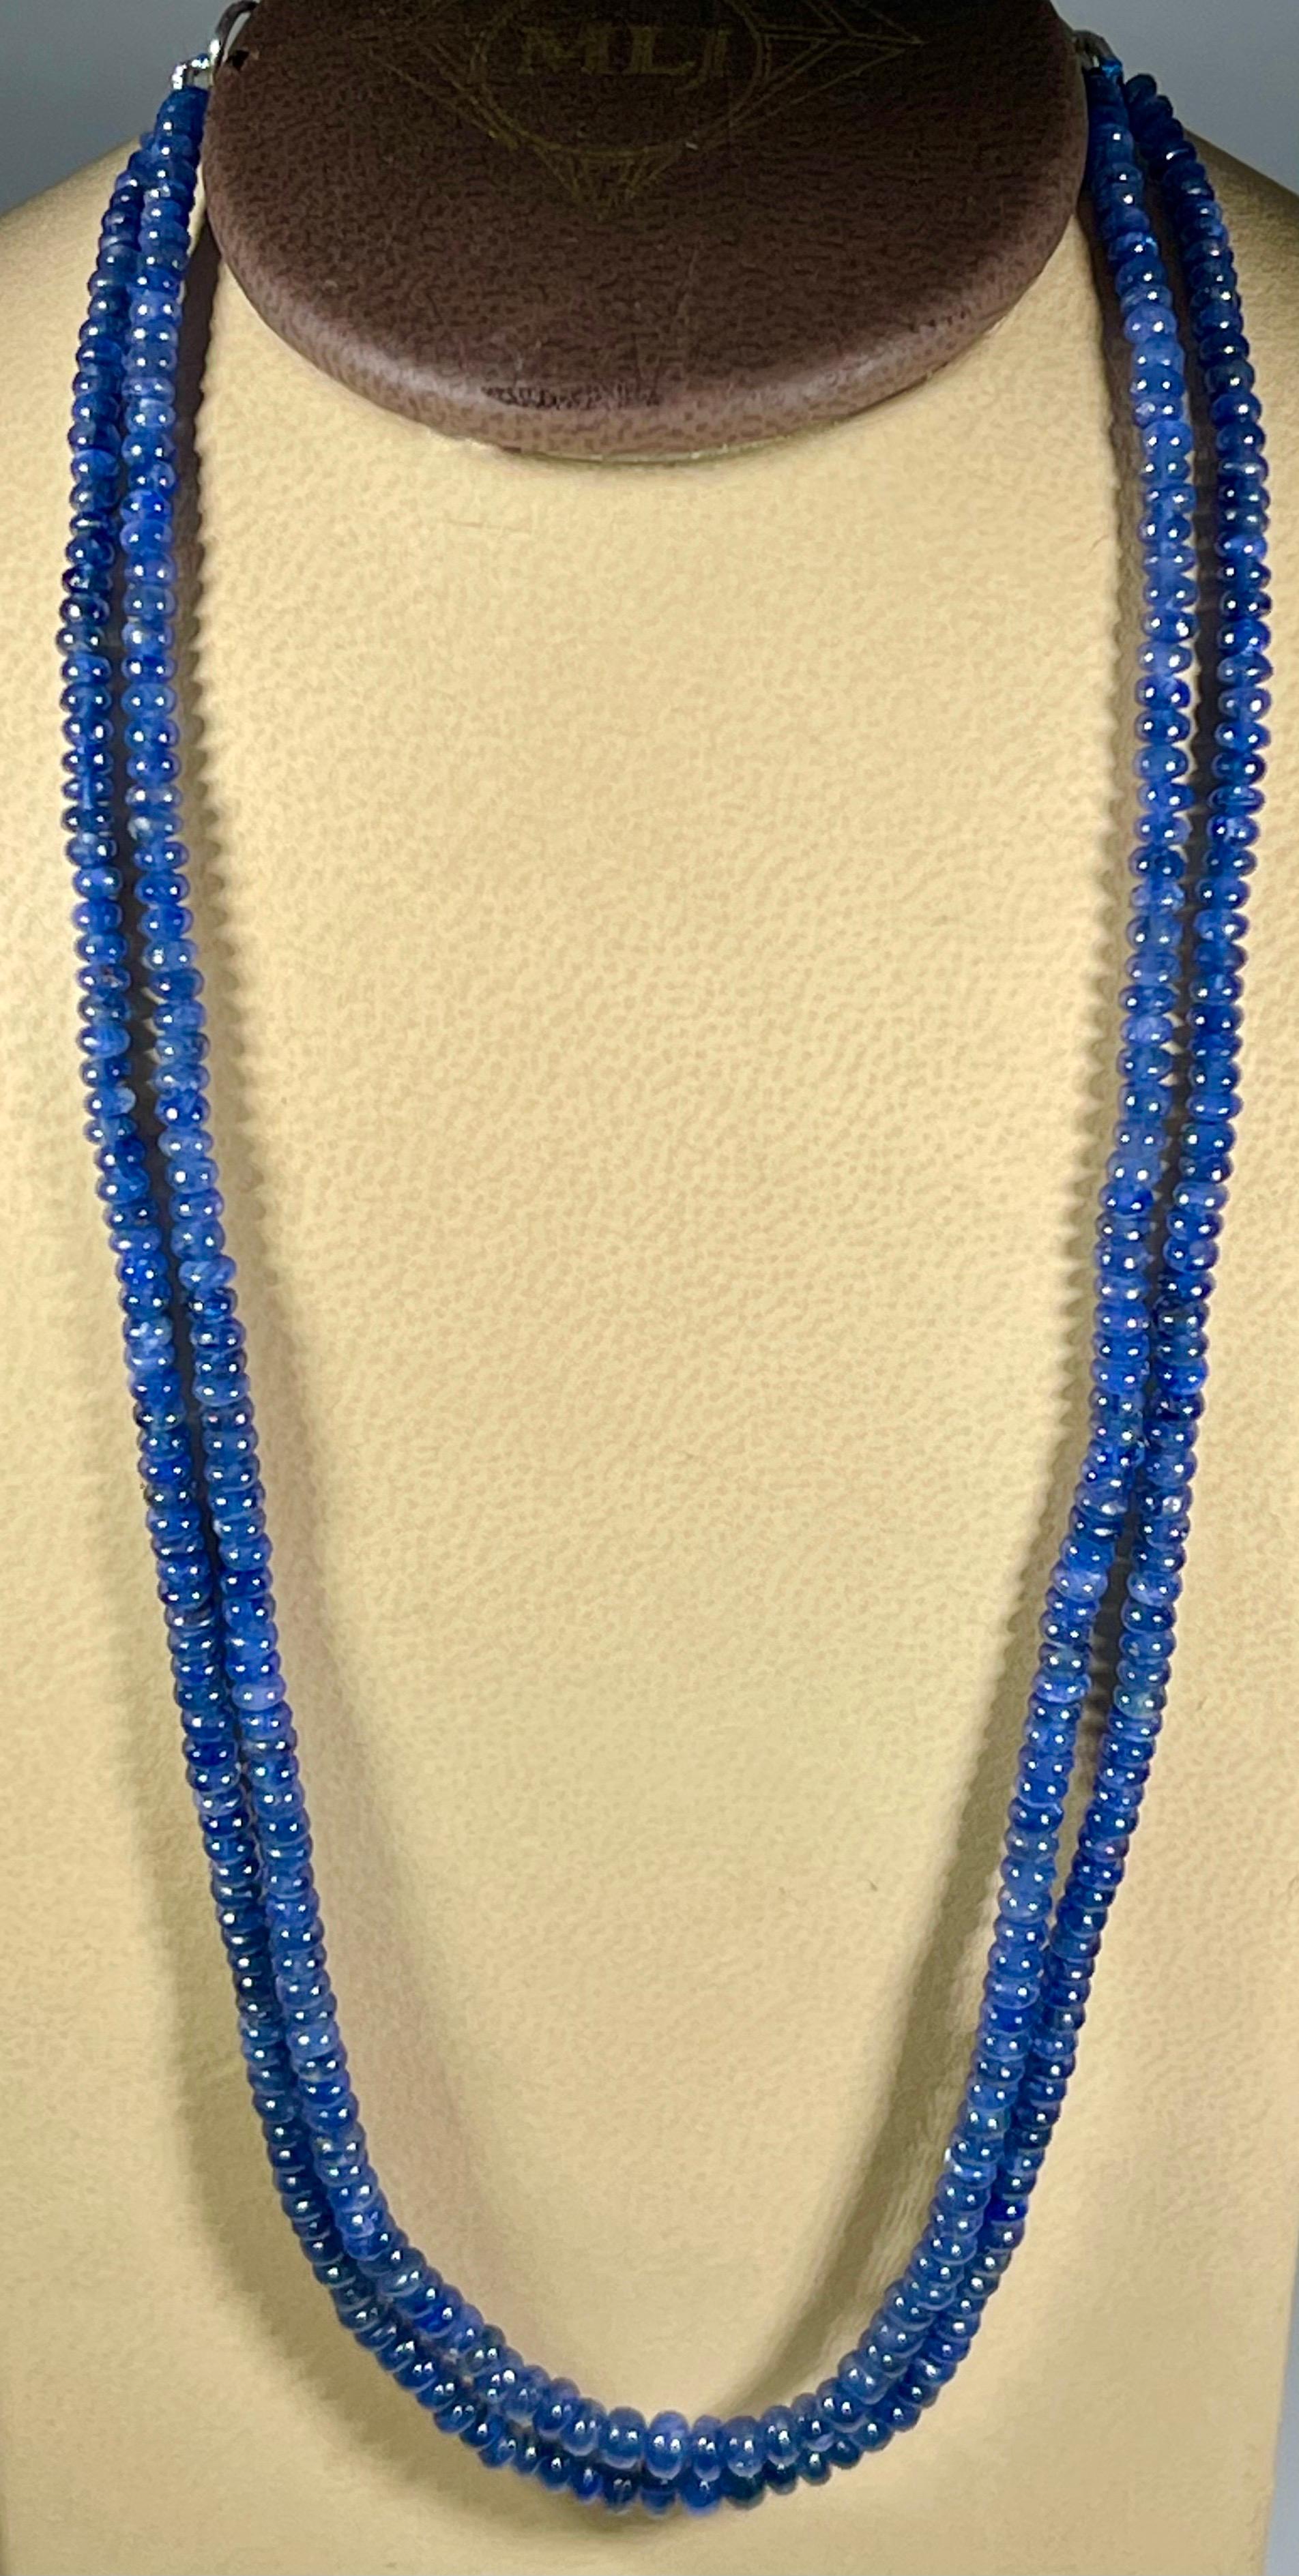 105 Carat Natural Sapphire Bead Two-Strand Necklace Sterling Silver Clasp In Excellent Condition For Sale In New York, NY